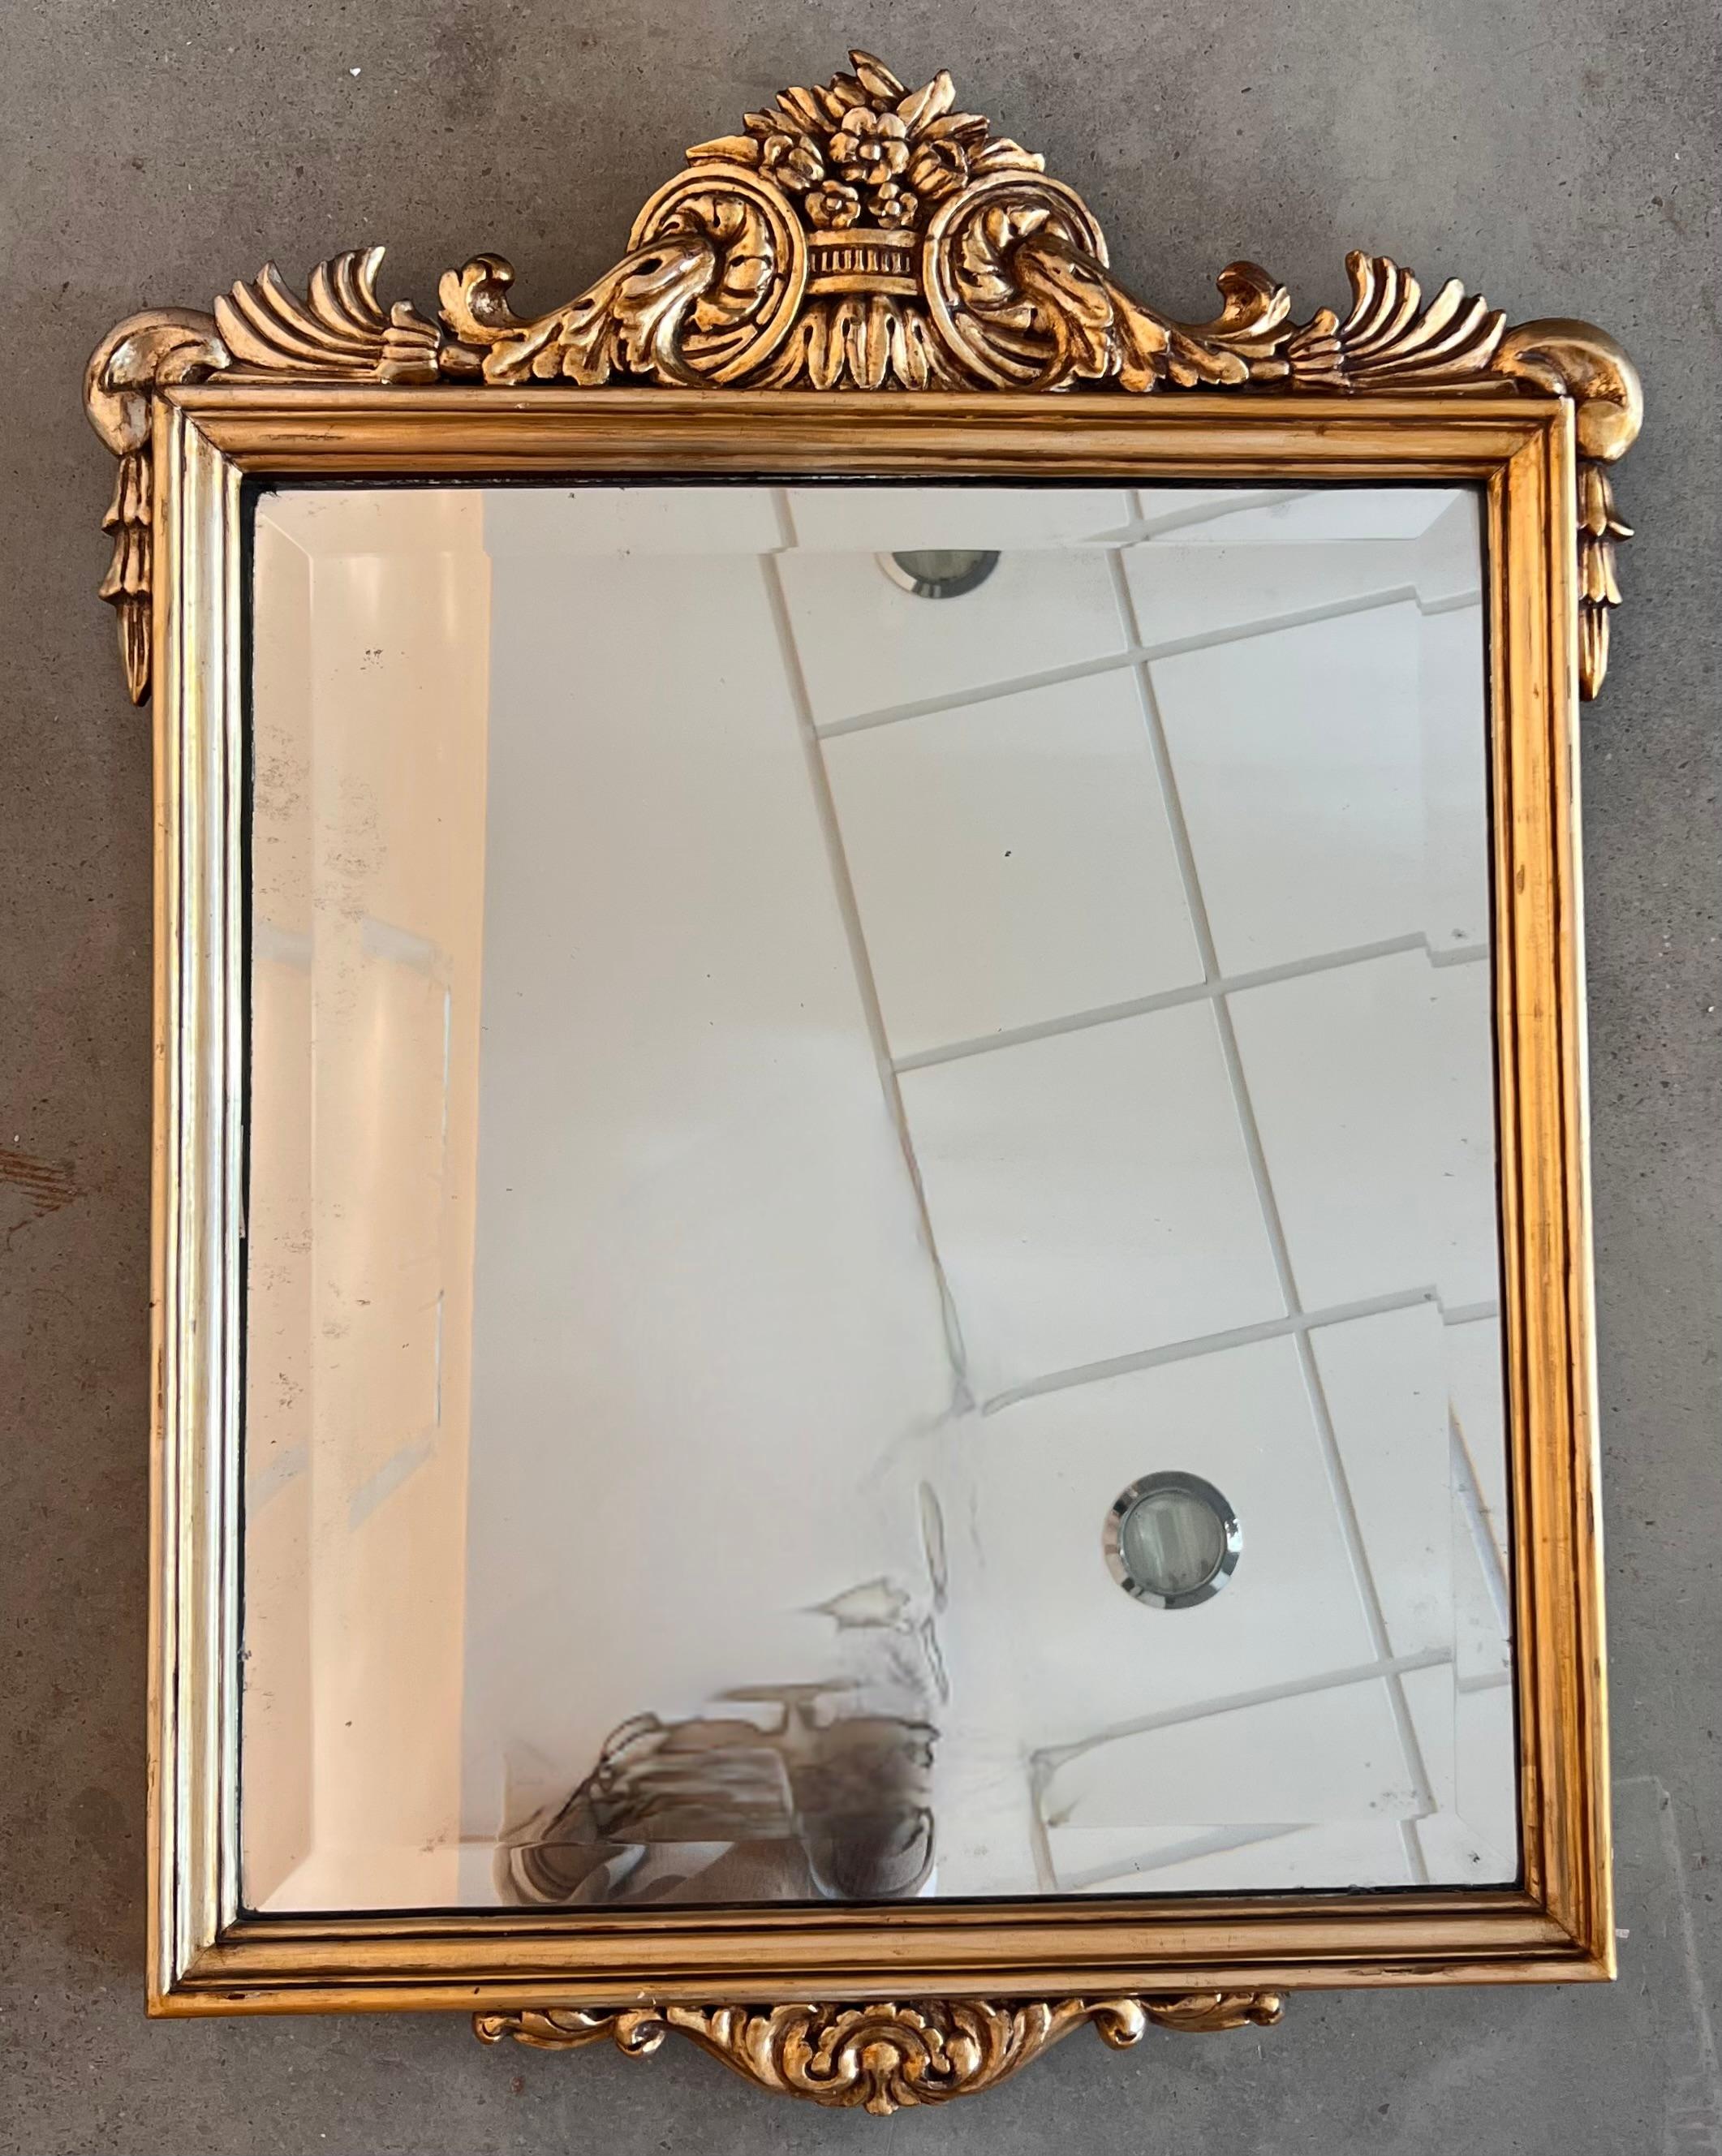 Giltwood 20th French Empire Period Carved Gilt Wood Rectangular Mirror with Crest